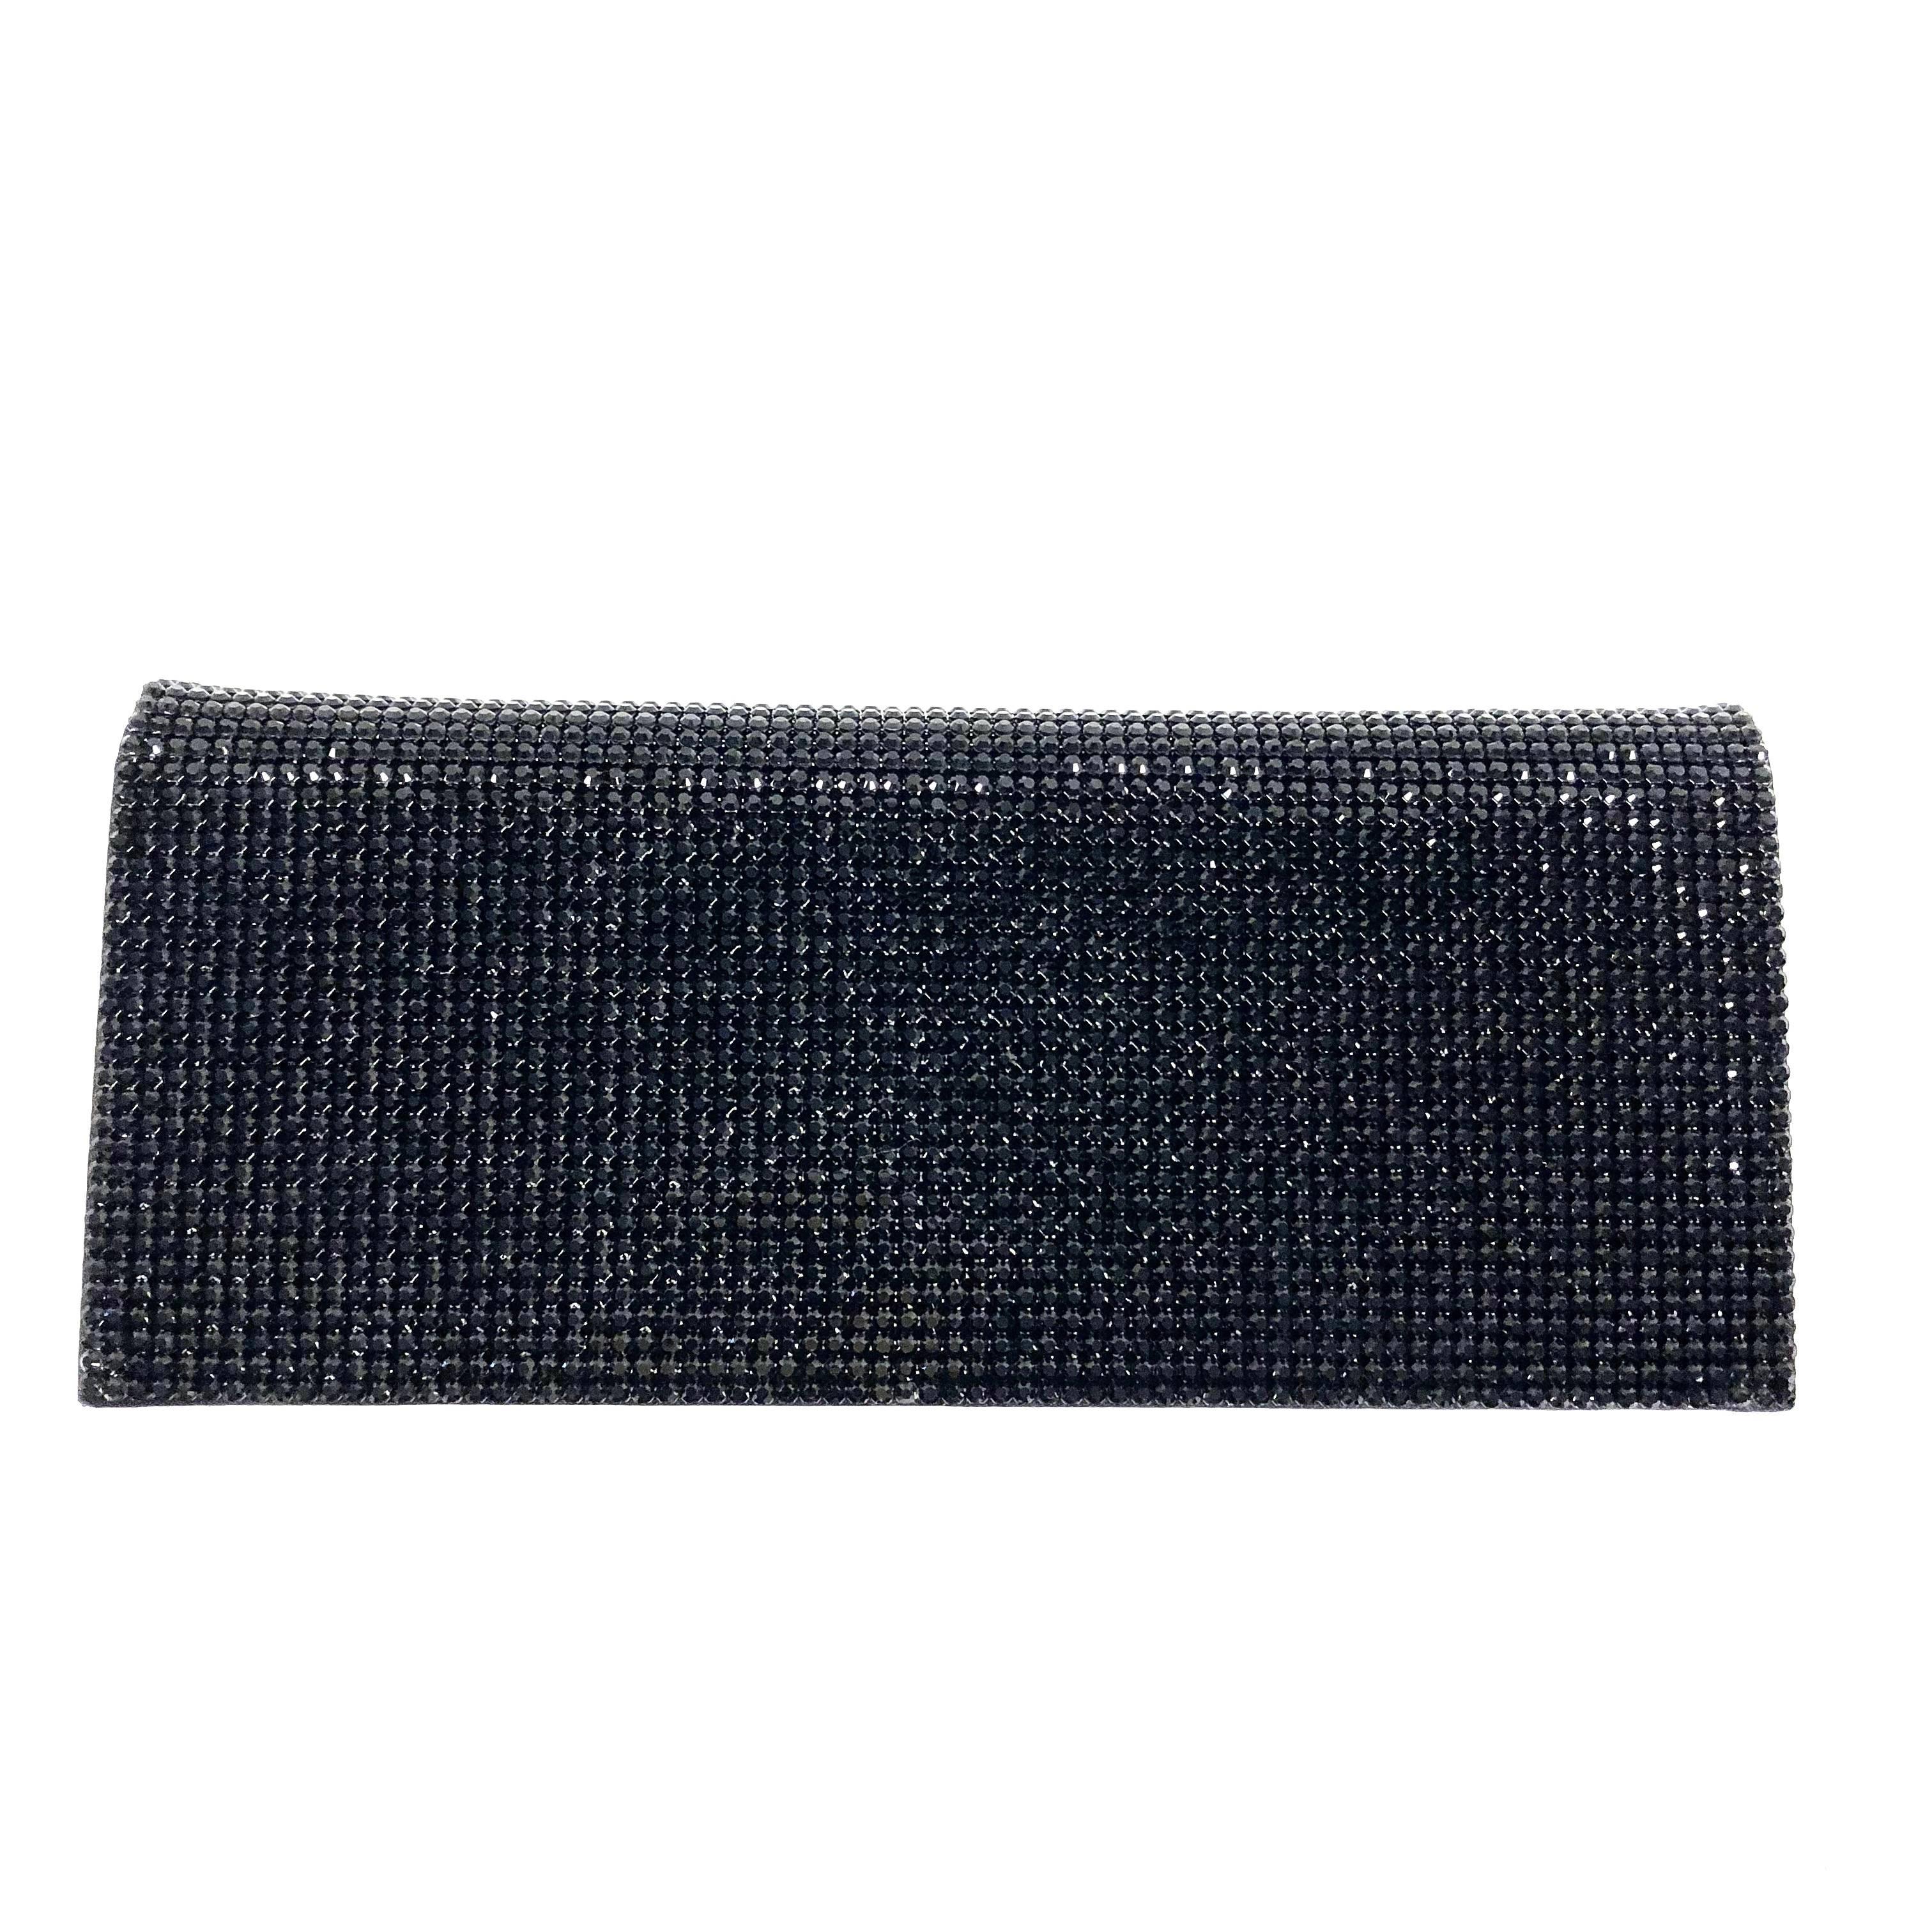 Gorgeous Escada evening bag covered with black crystals. Blsck metal chain strap. Can be used as a clutch. 